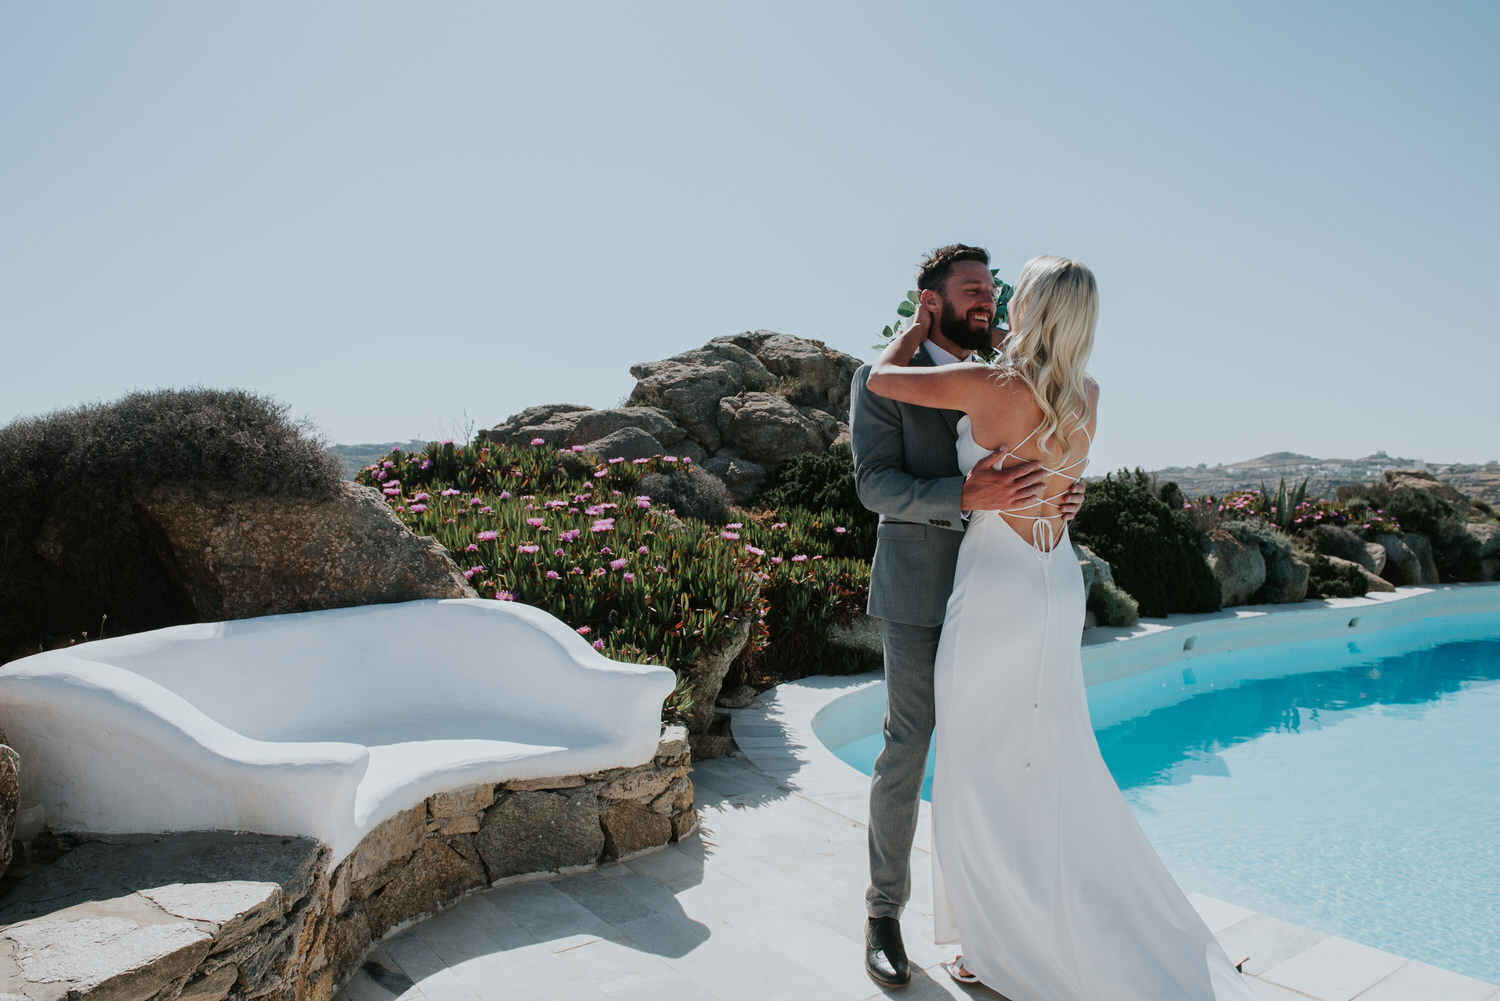 Mykonos wedding photographer: bride reaches out to her groom next to the pool and the rocks in the background.